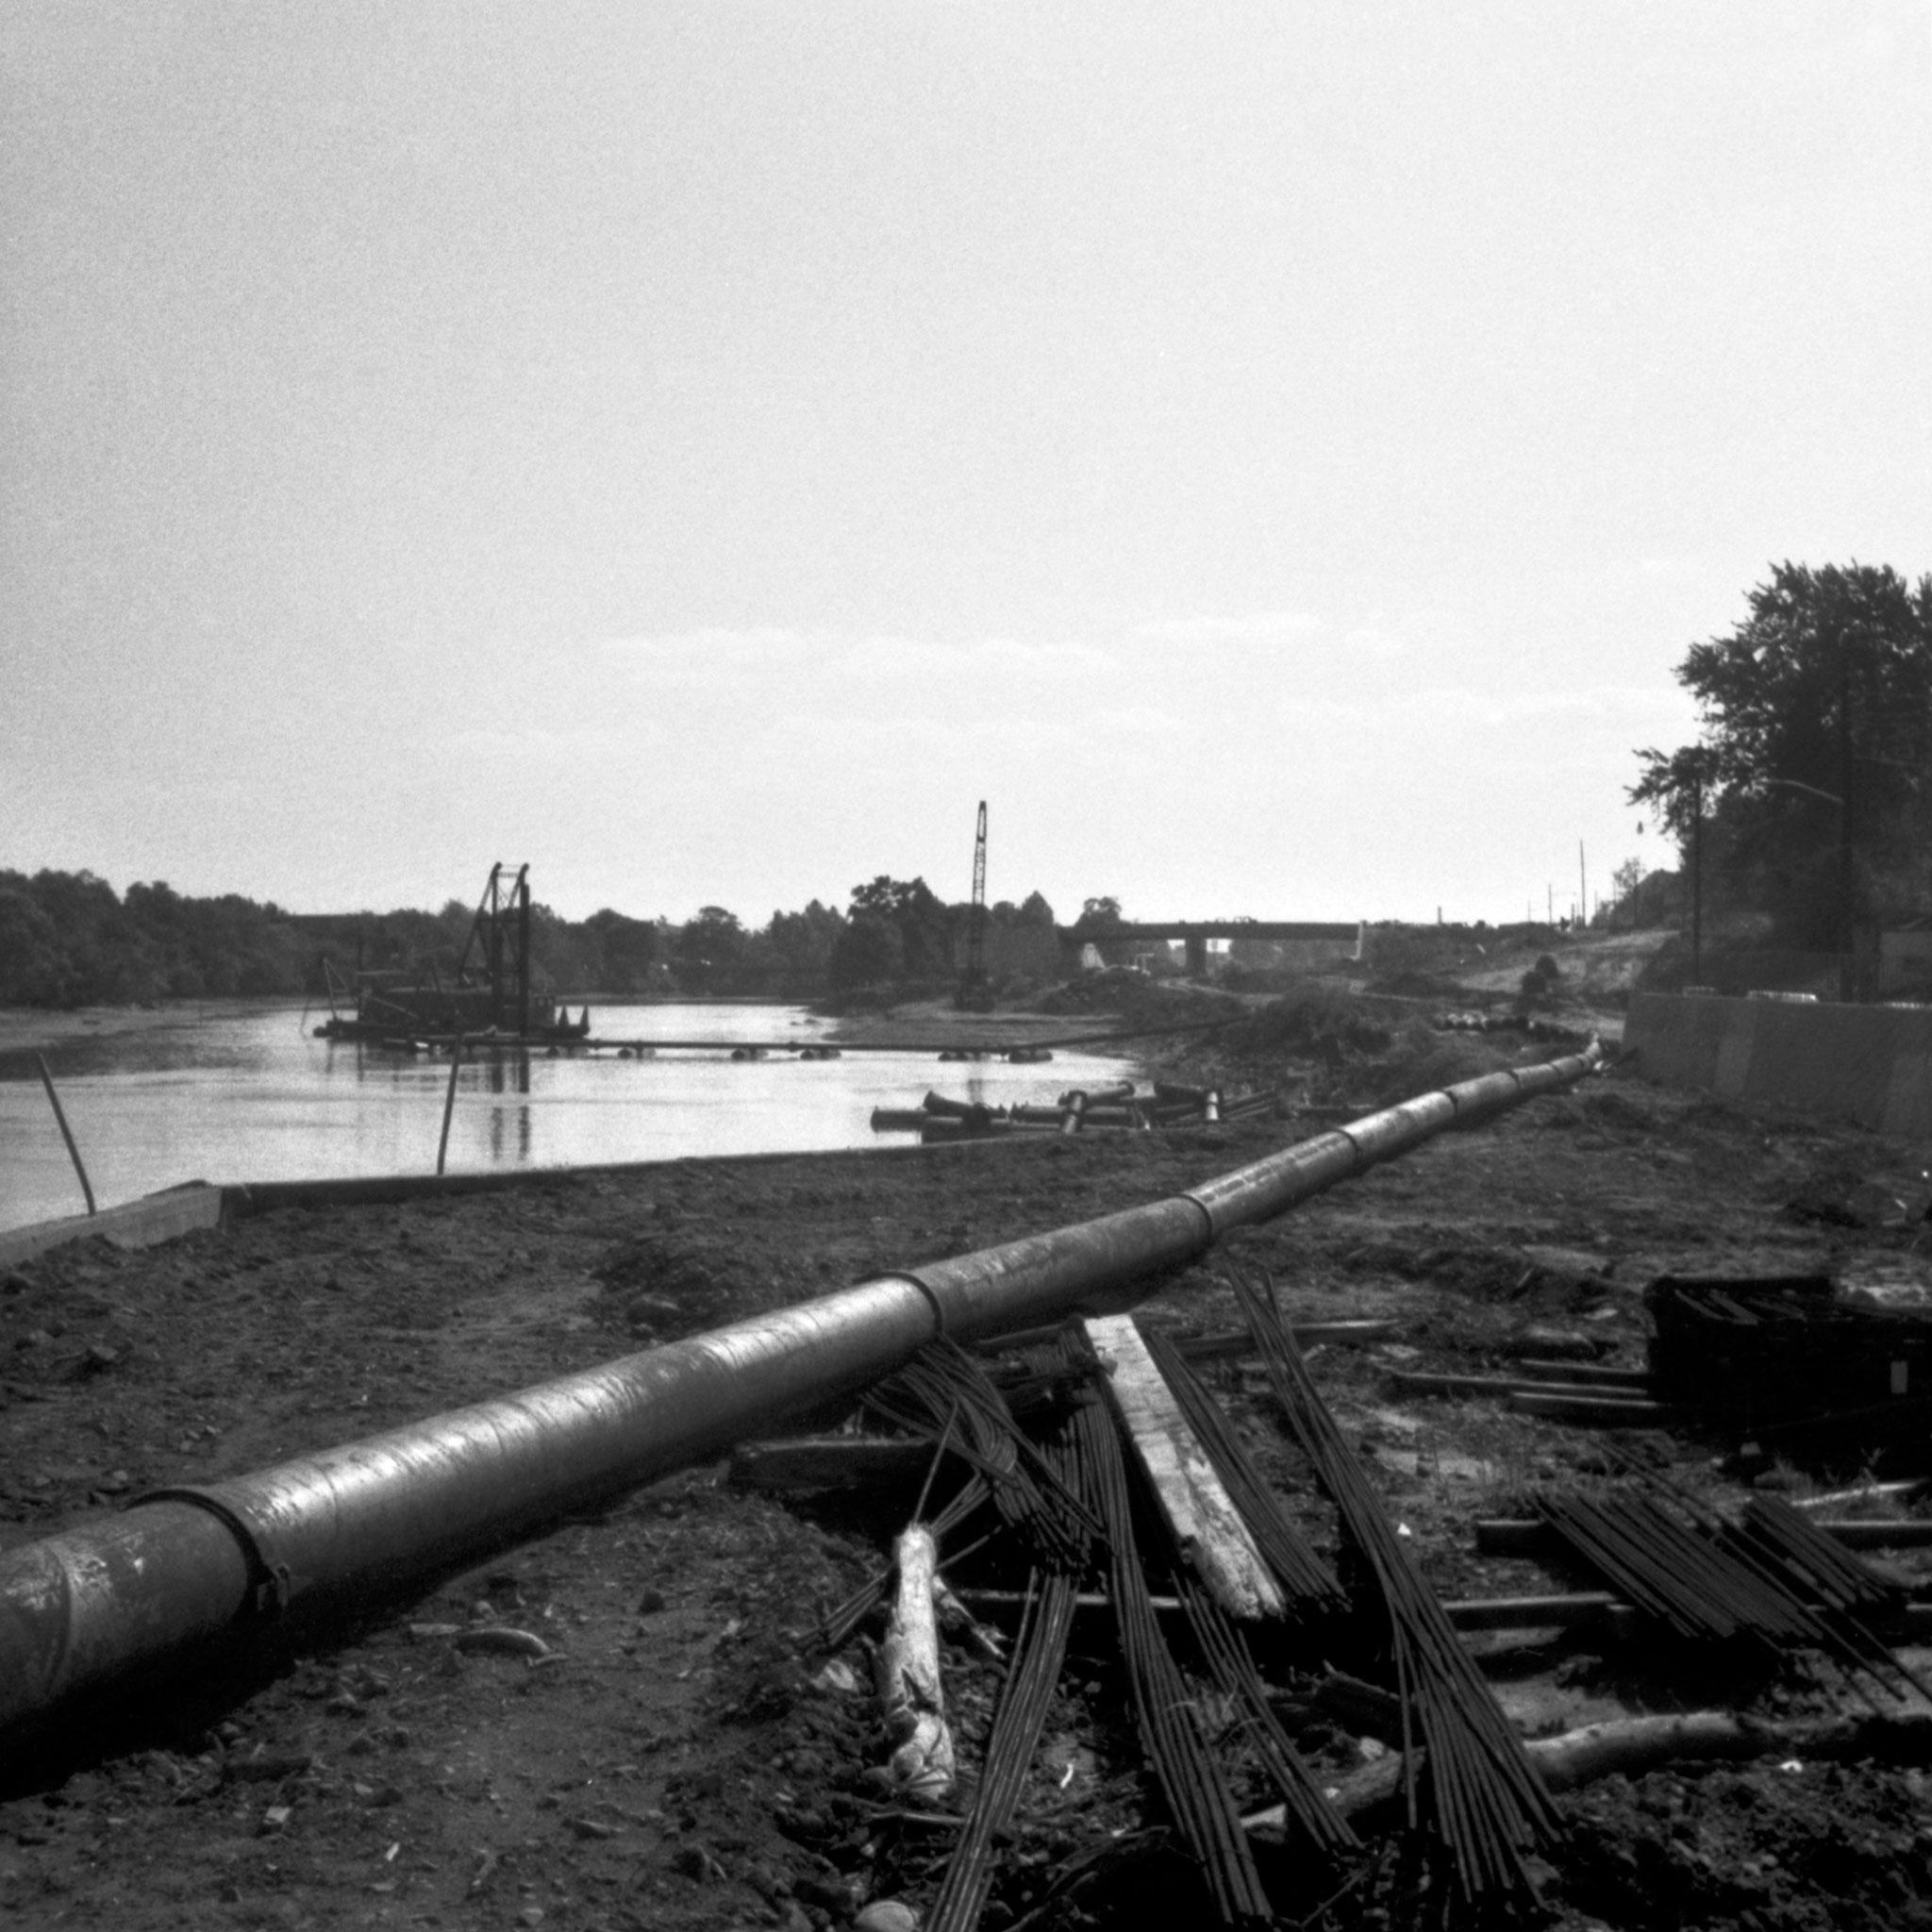 black and white image of a large metal pipe next to a body of water and landscape in the background